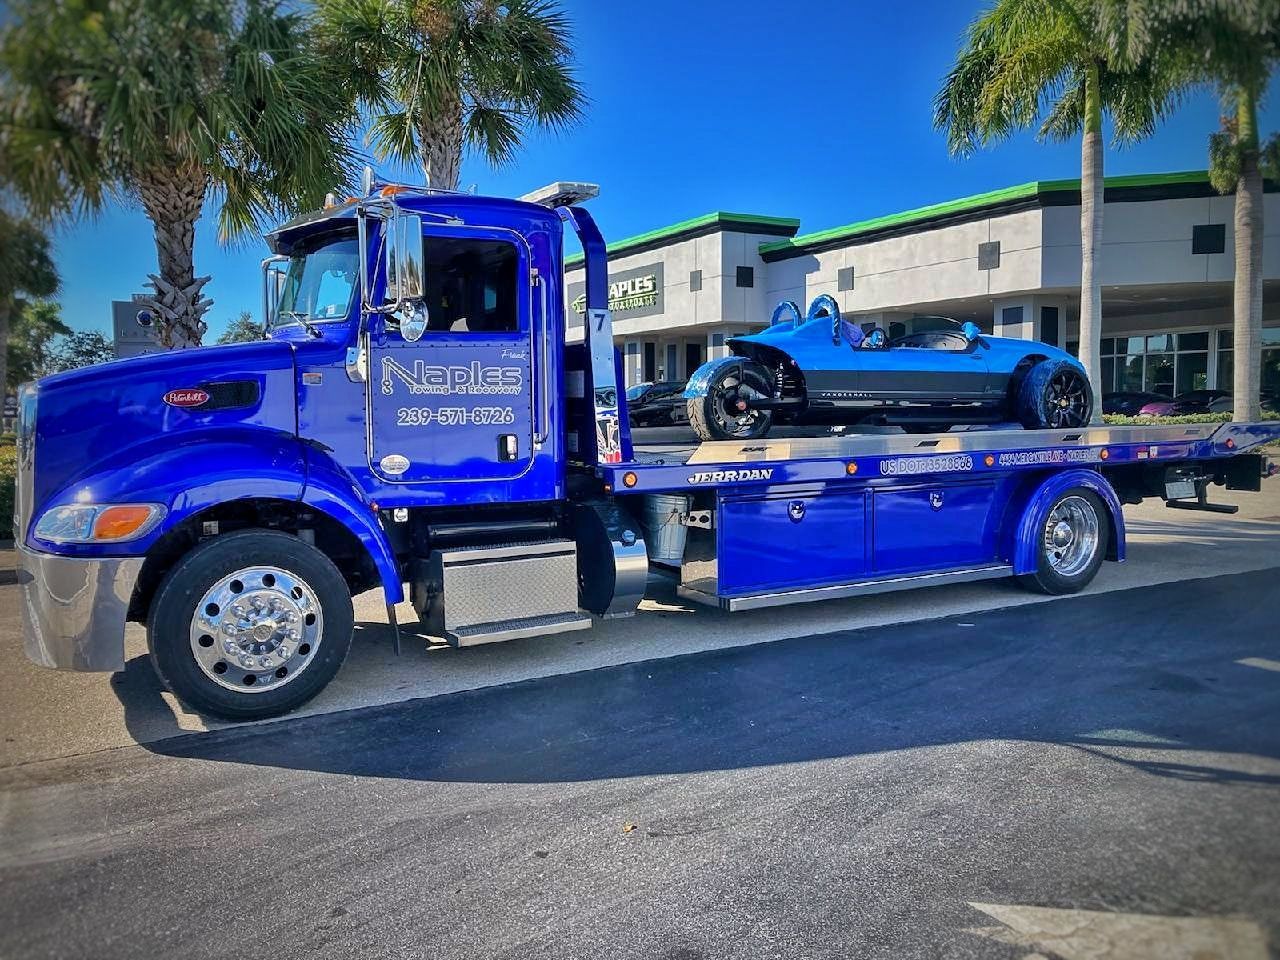 Reliable towing services in Bonita Springs, FL provided by Naples Towing and Recovery.